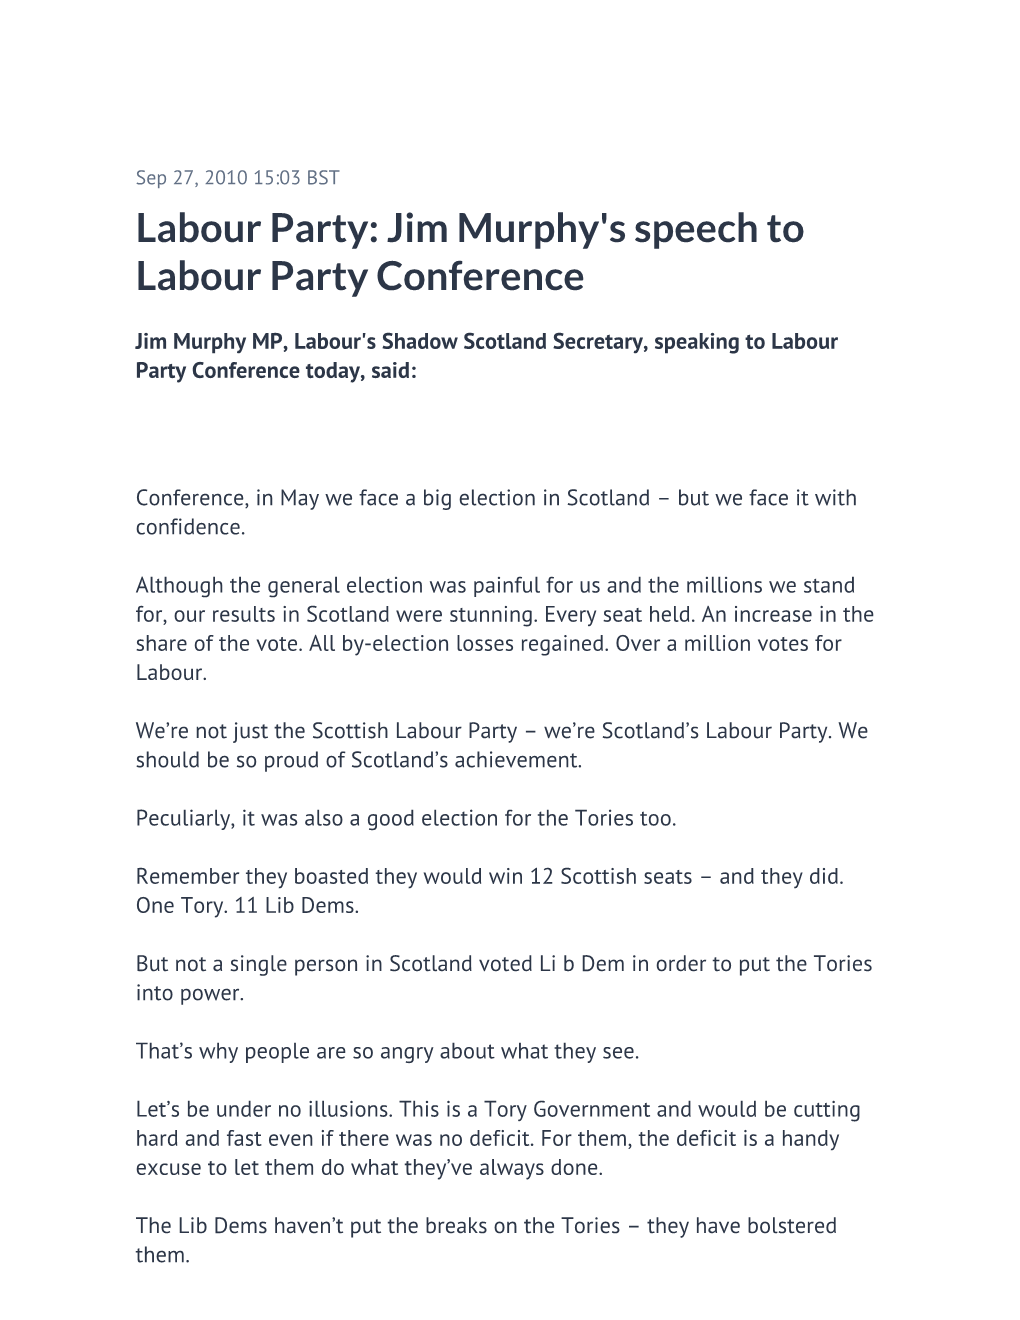 Jim Murphy's Speech to Labour Party Conference